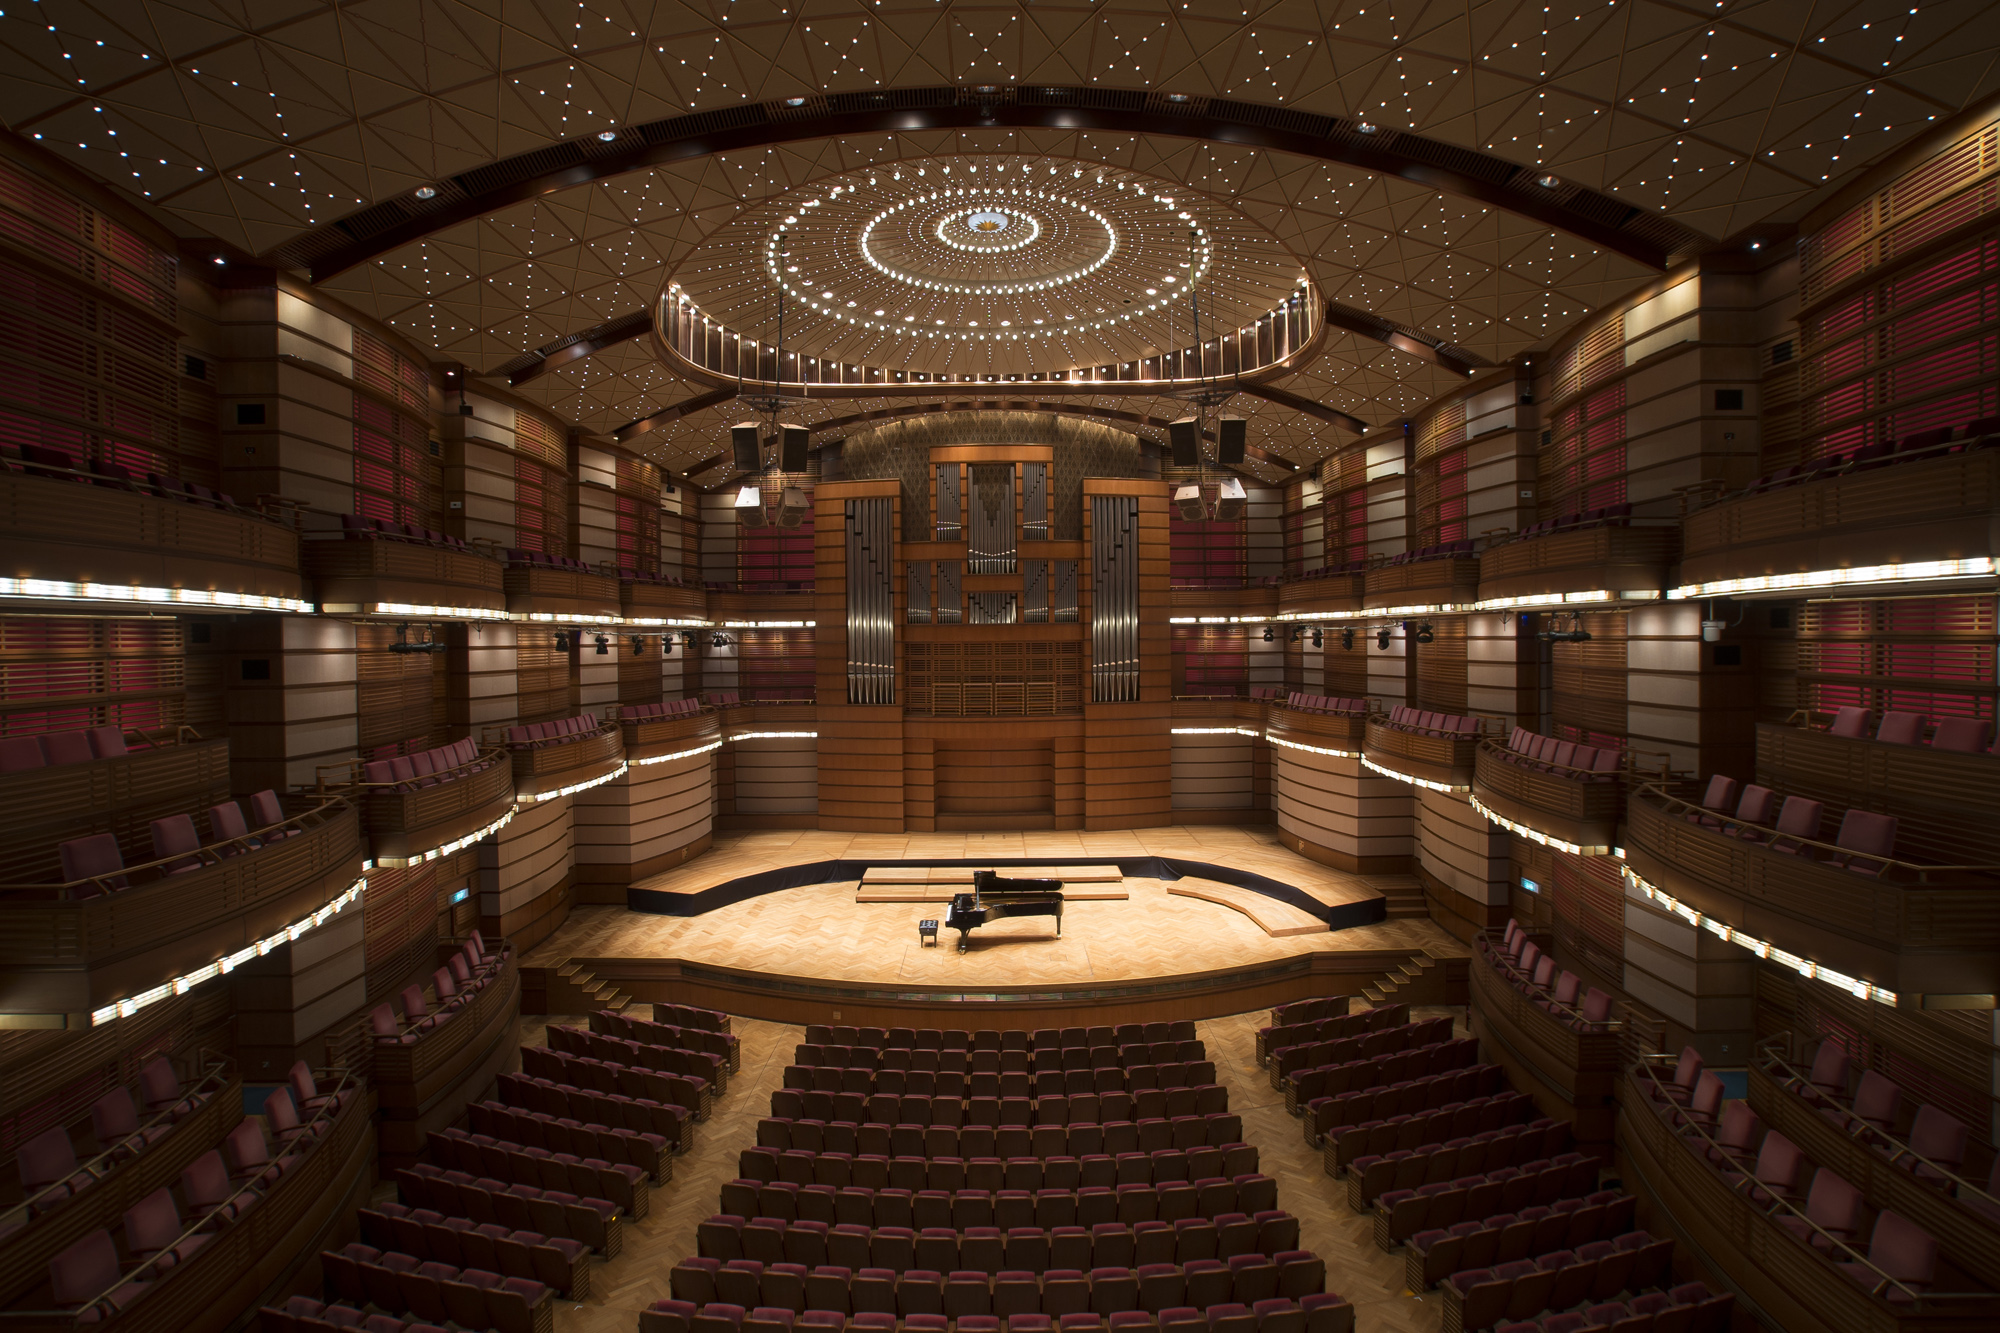 The Interior of DFP - Malaysian philharmonic orchestra features